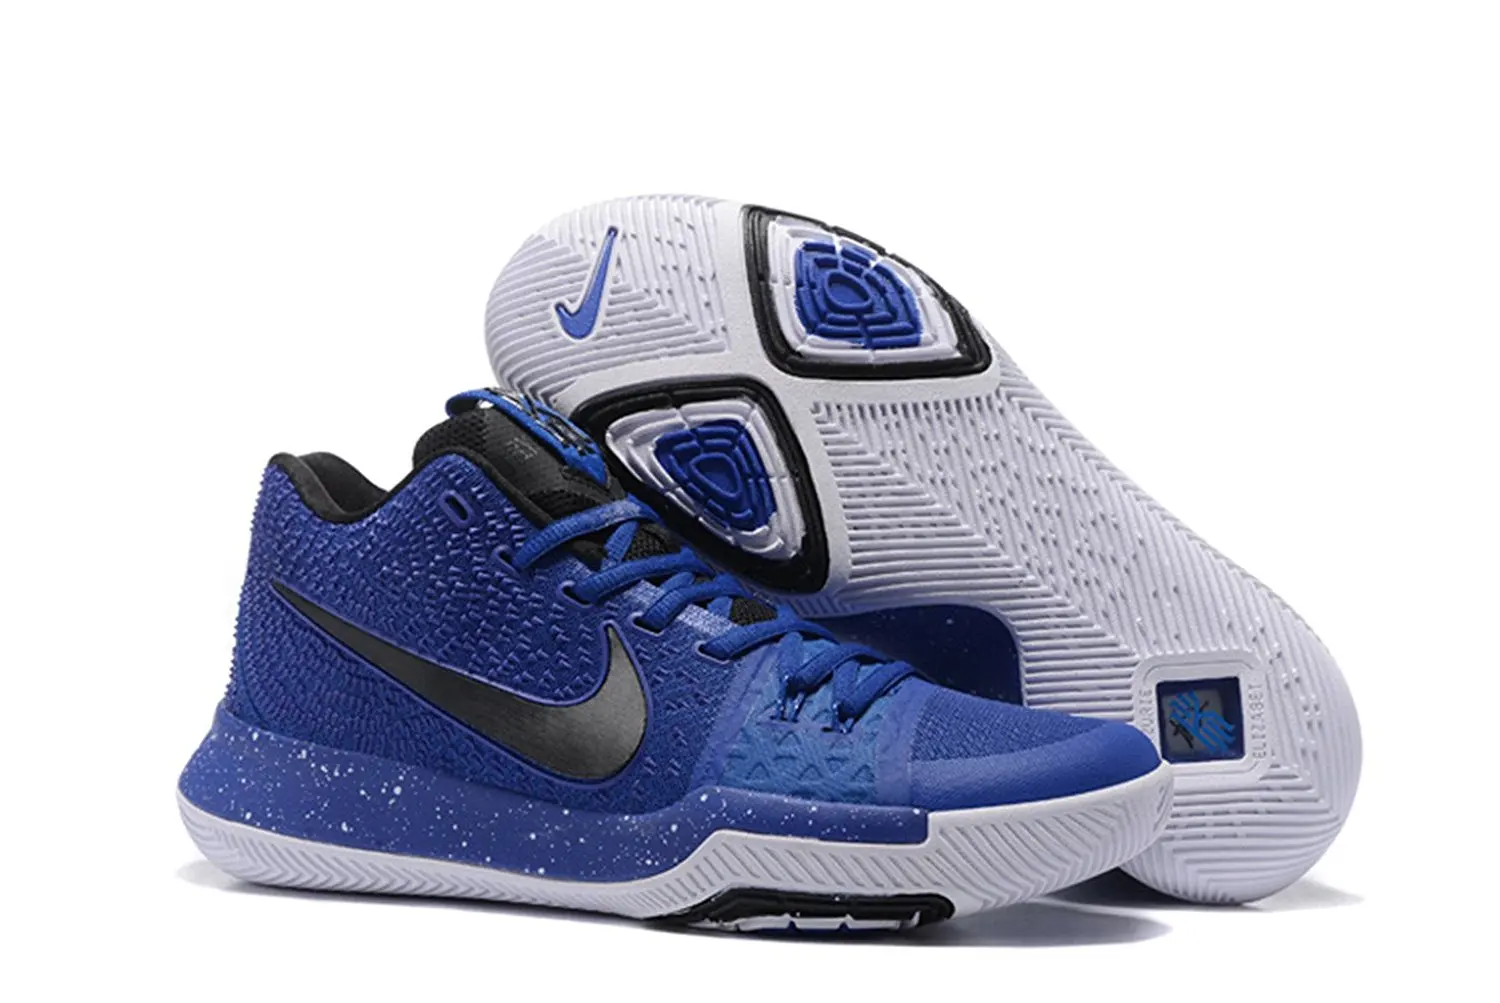 kyrie irving shoes 3 blue